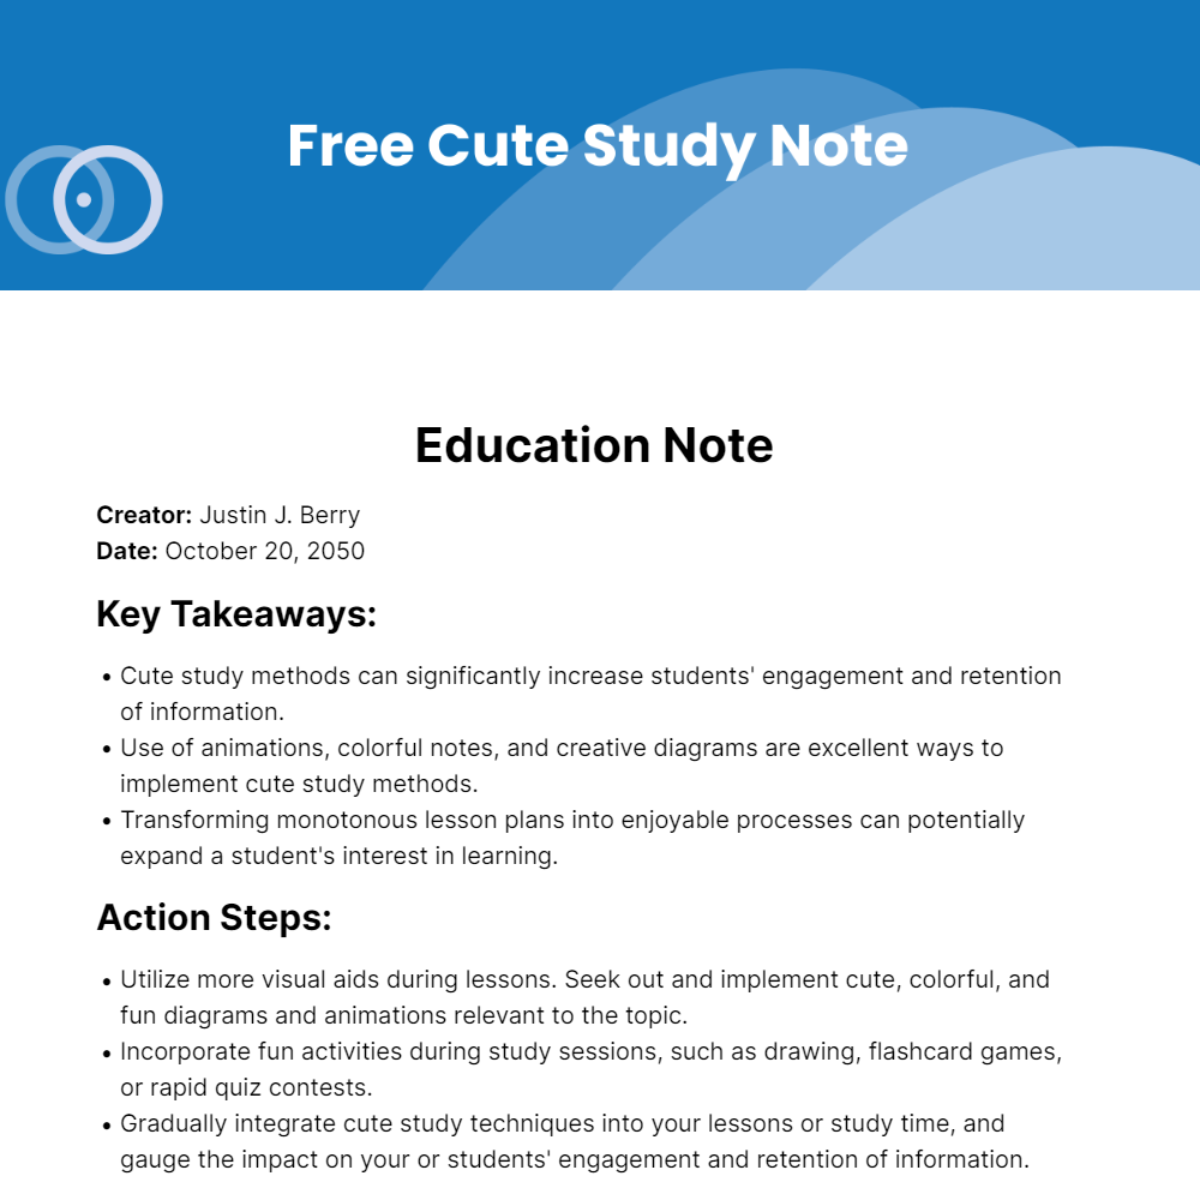 Free Cute Study Note Template